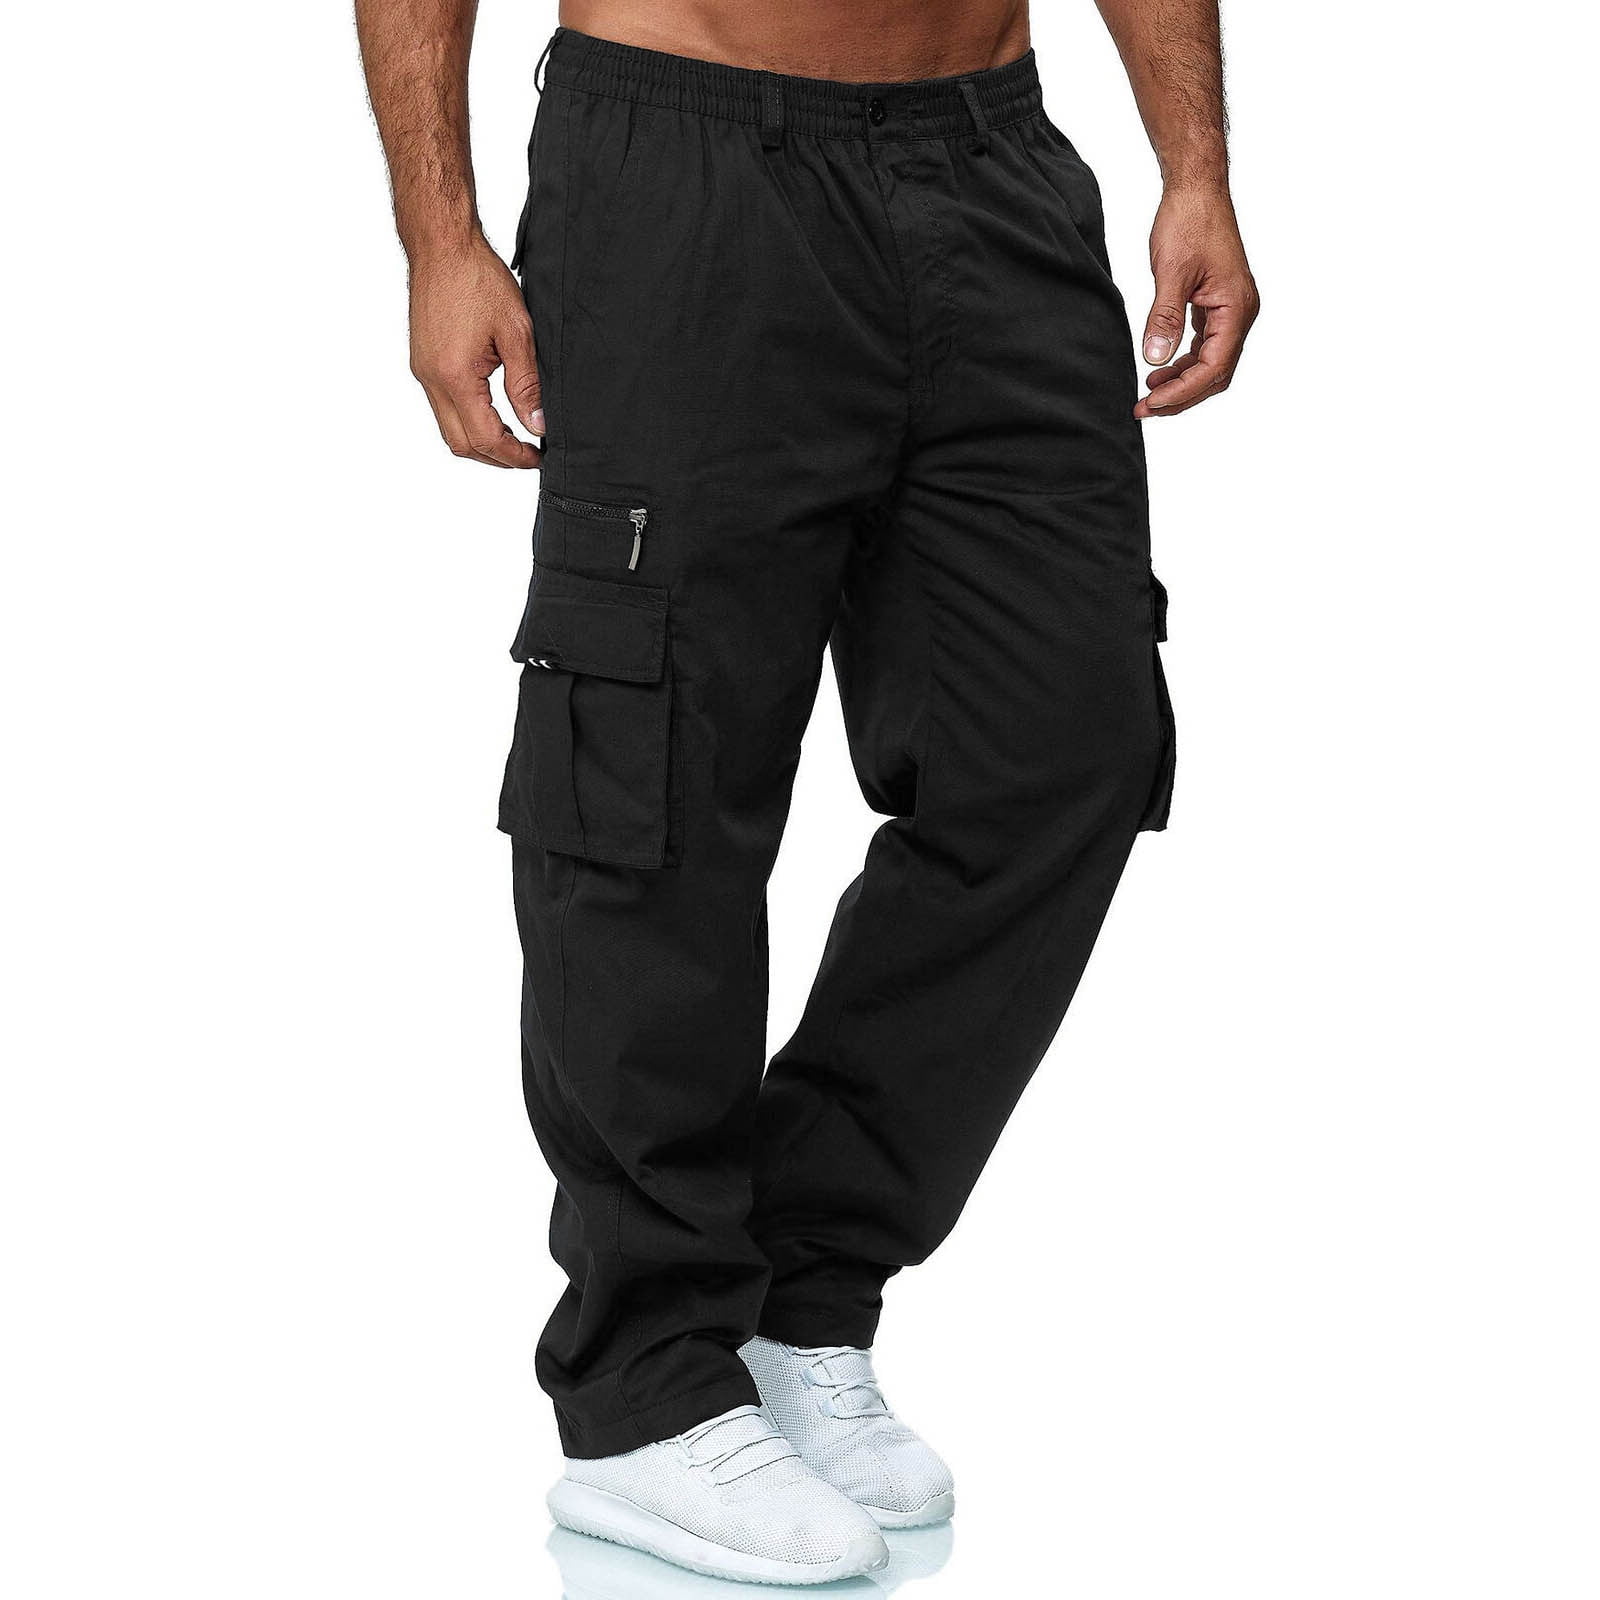 Men's Pockets Military Cargo Pant Elastic Waisted Relaxed Fit Pants ...